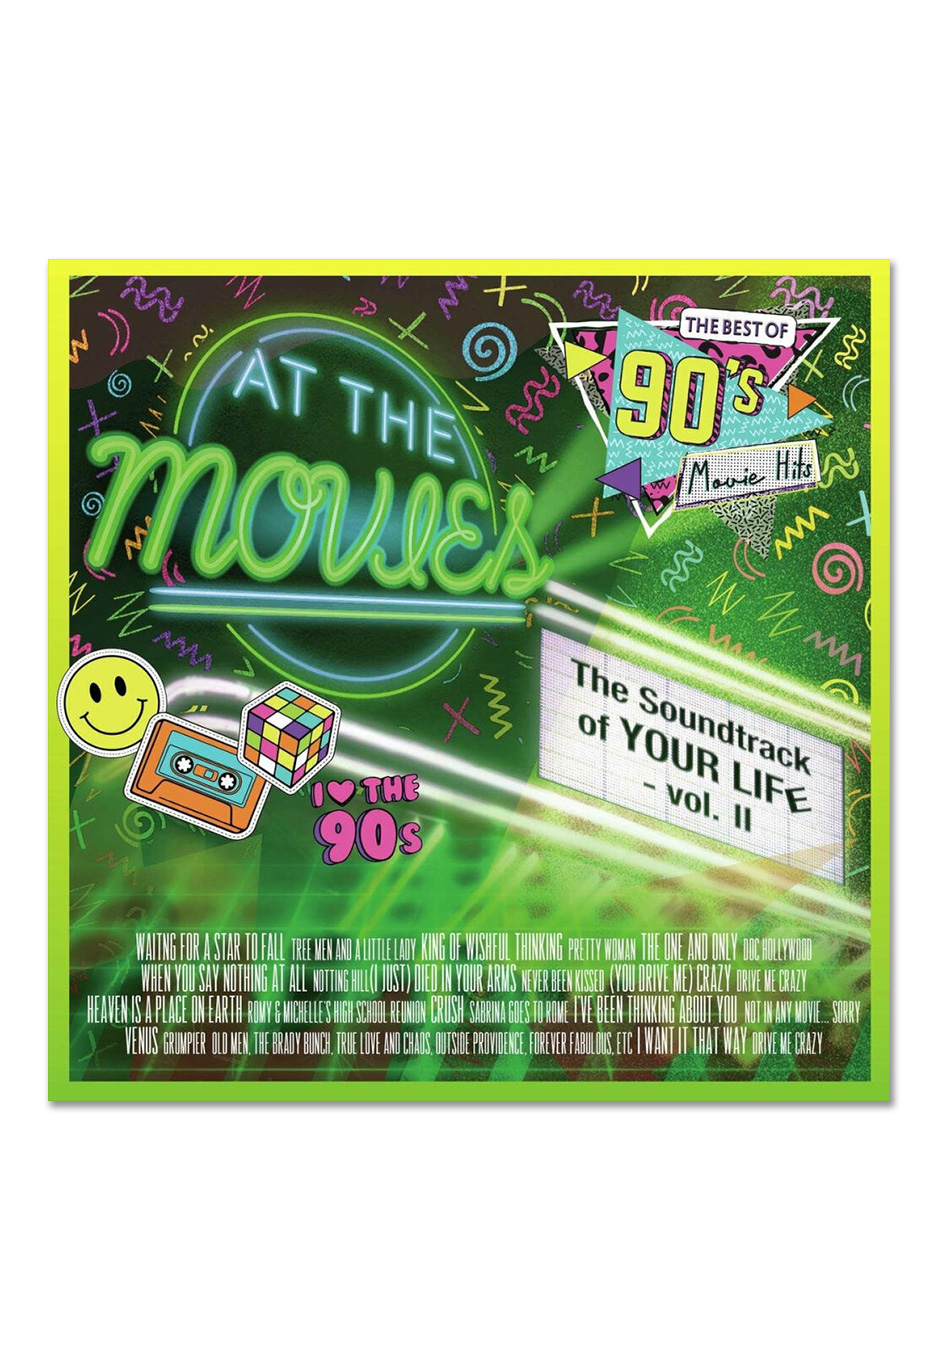 At The Movies - Soundtrack Of Your Life - Vol. 2 (Yellow Vinyl) (LP)